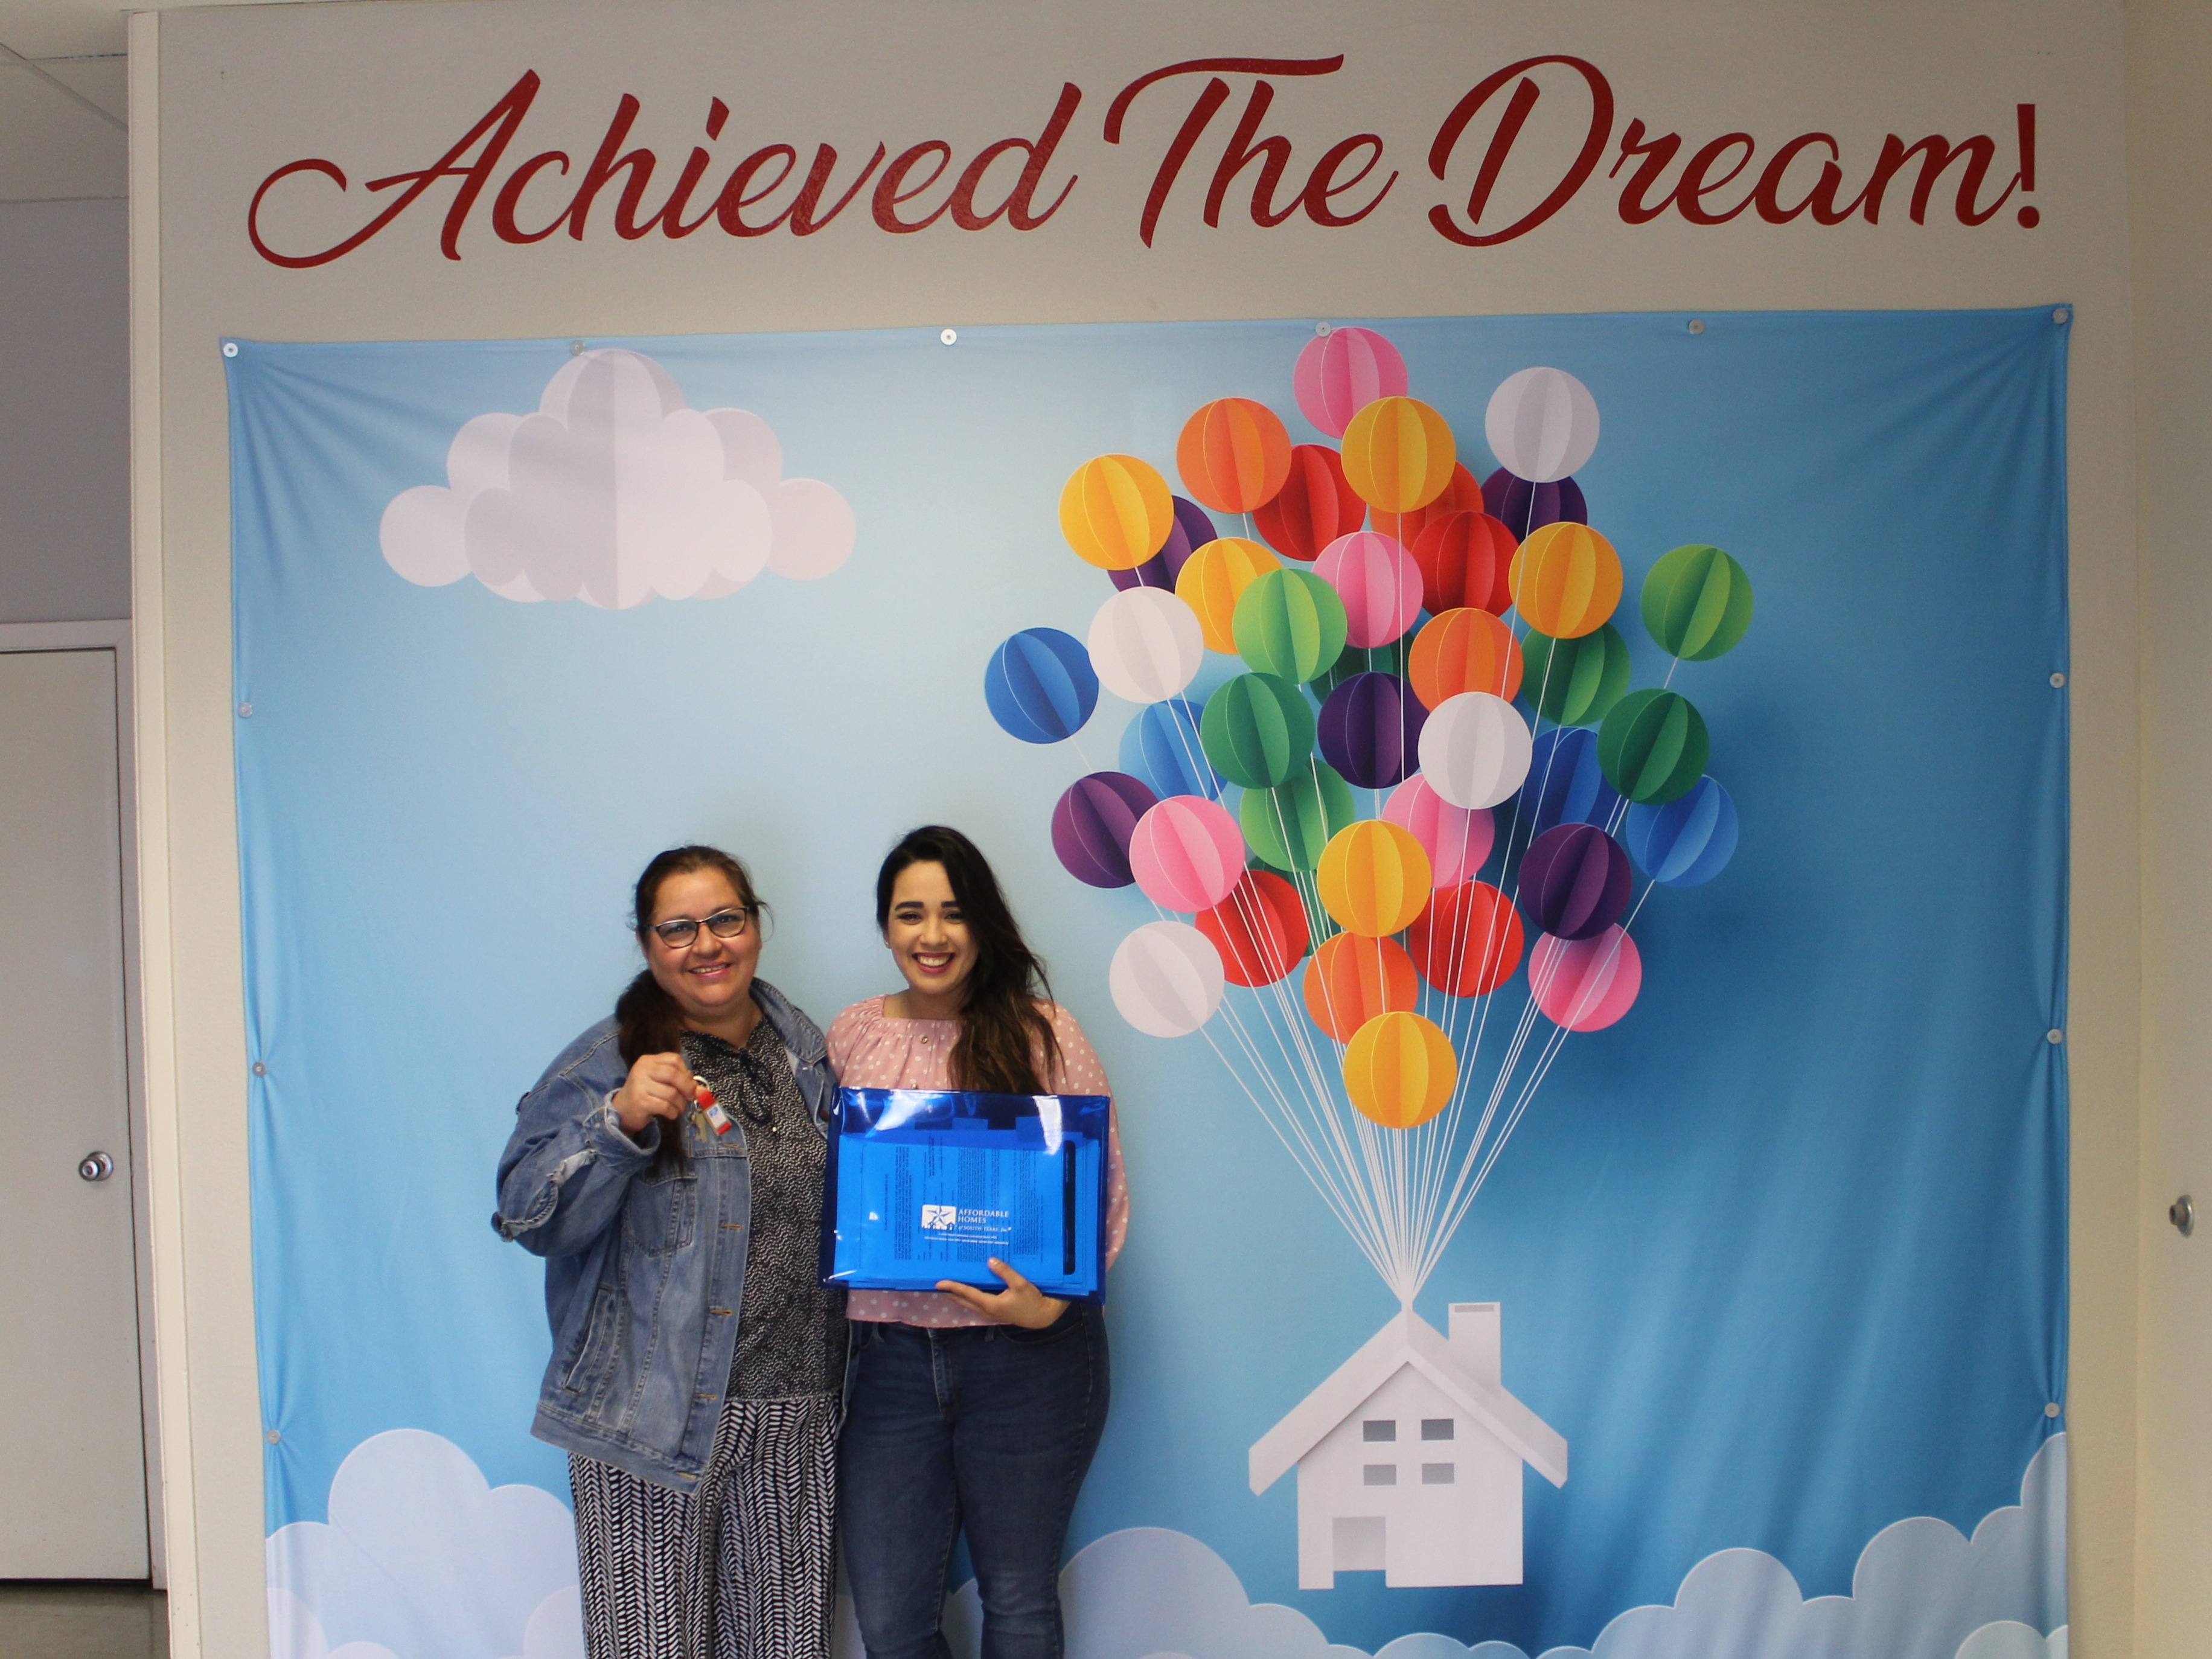 2 women standing in front of an Achieved The Dream background